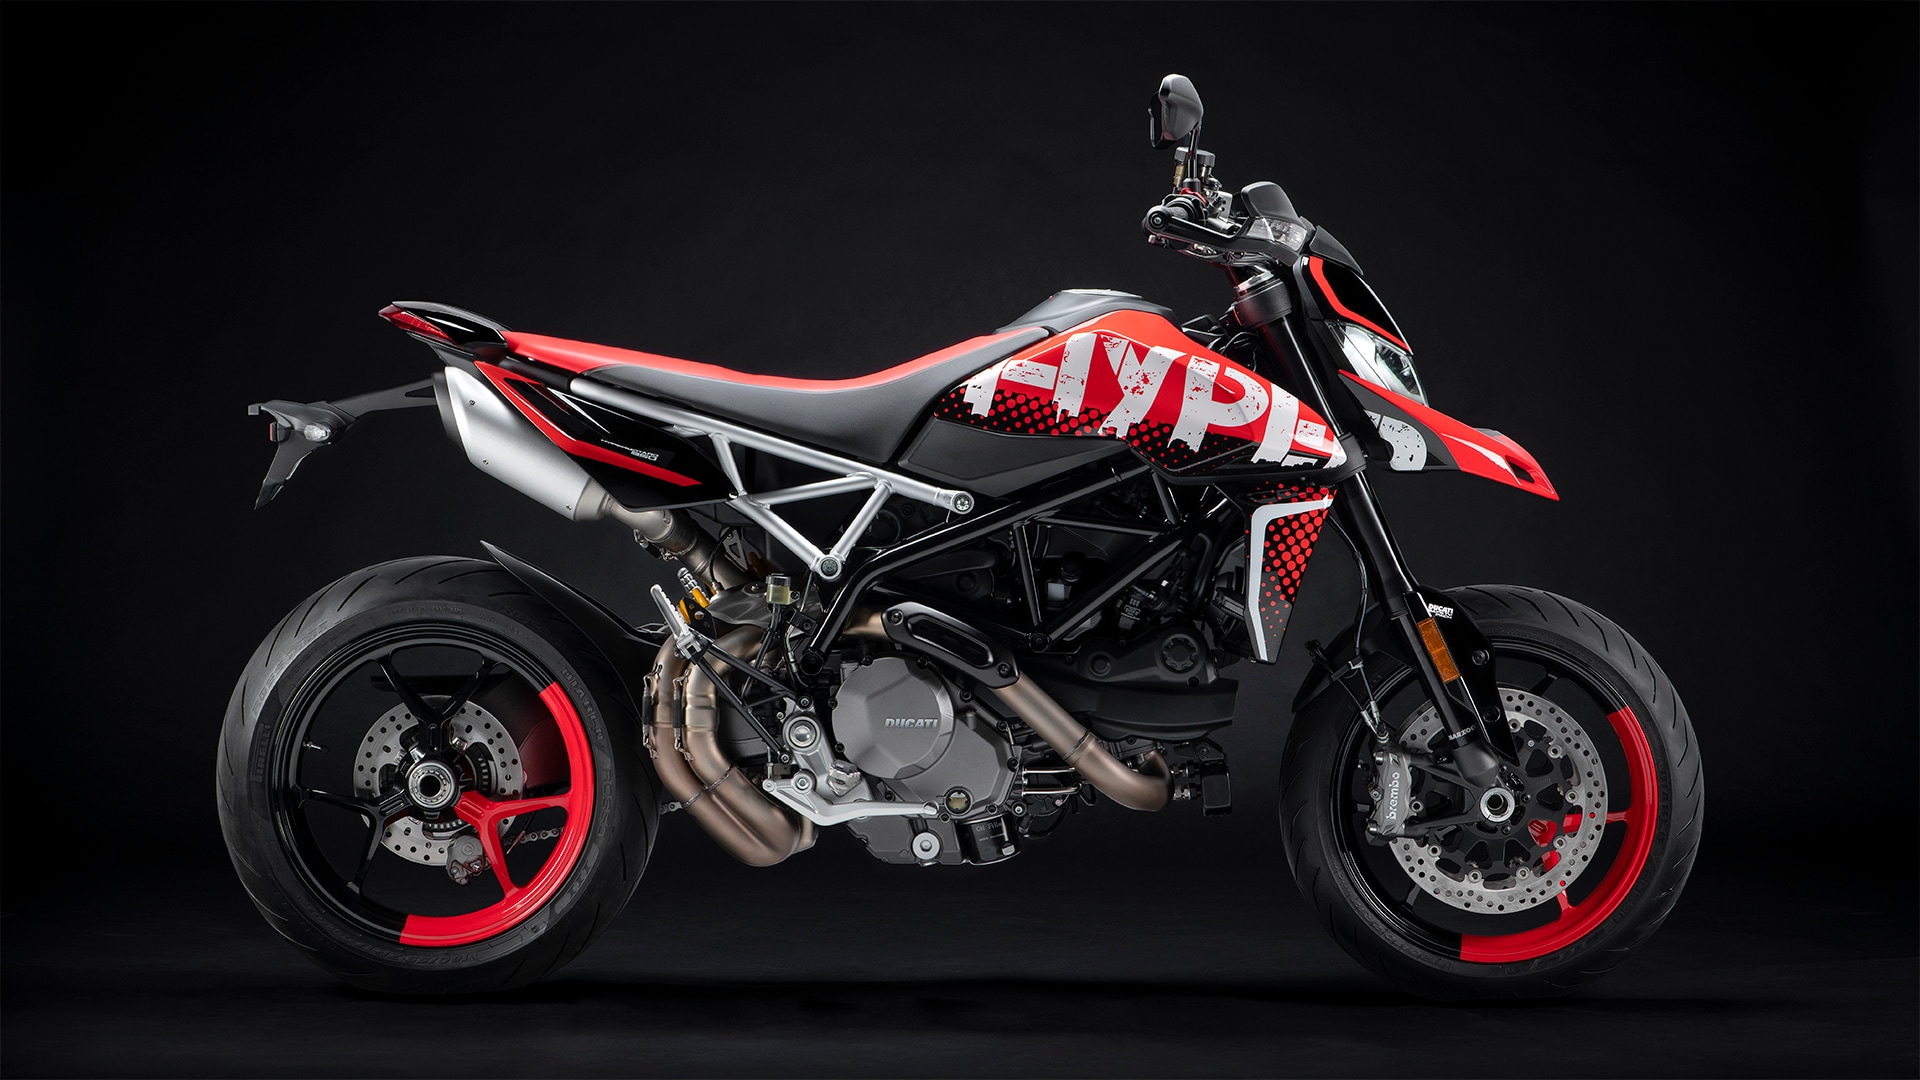 A view of Ducati's new Hypermotard 950 RVE, with neat 'graffiti' graphics and paint scheme 